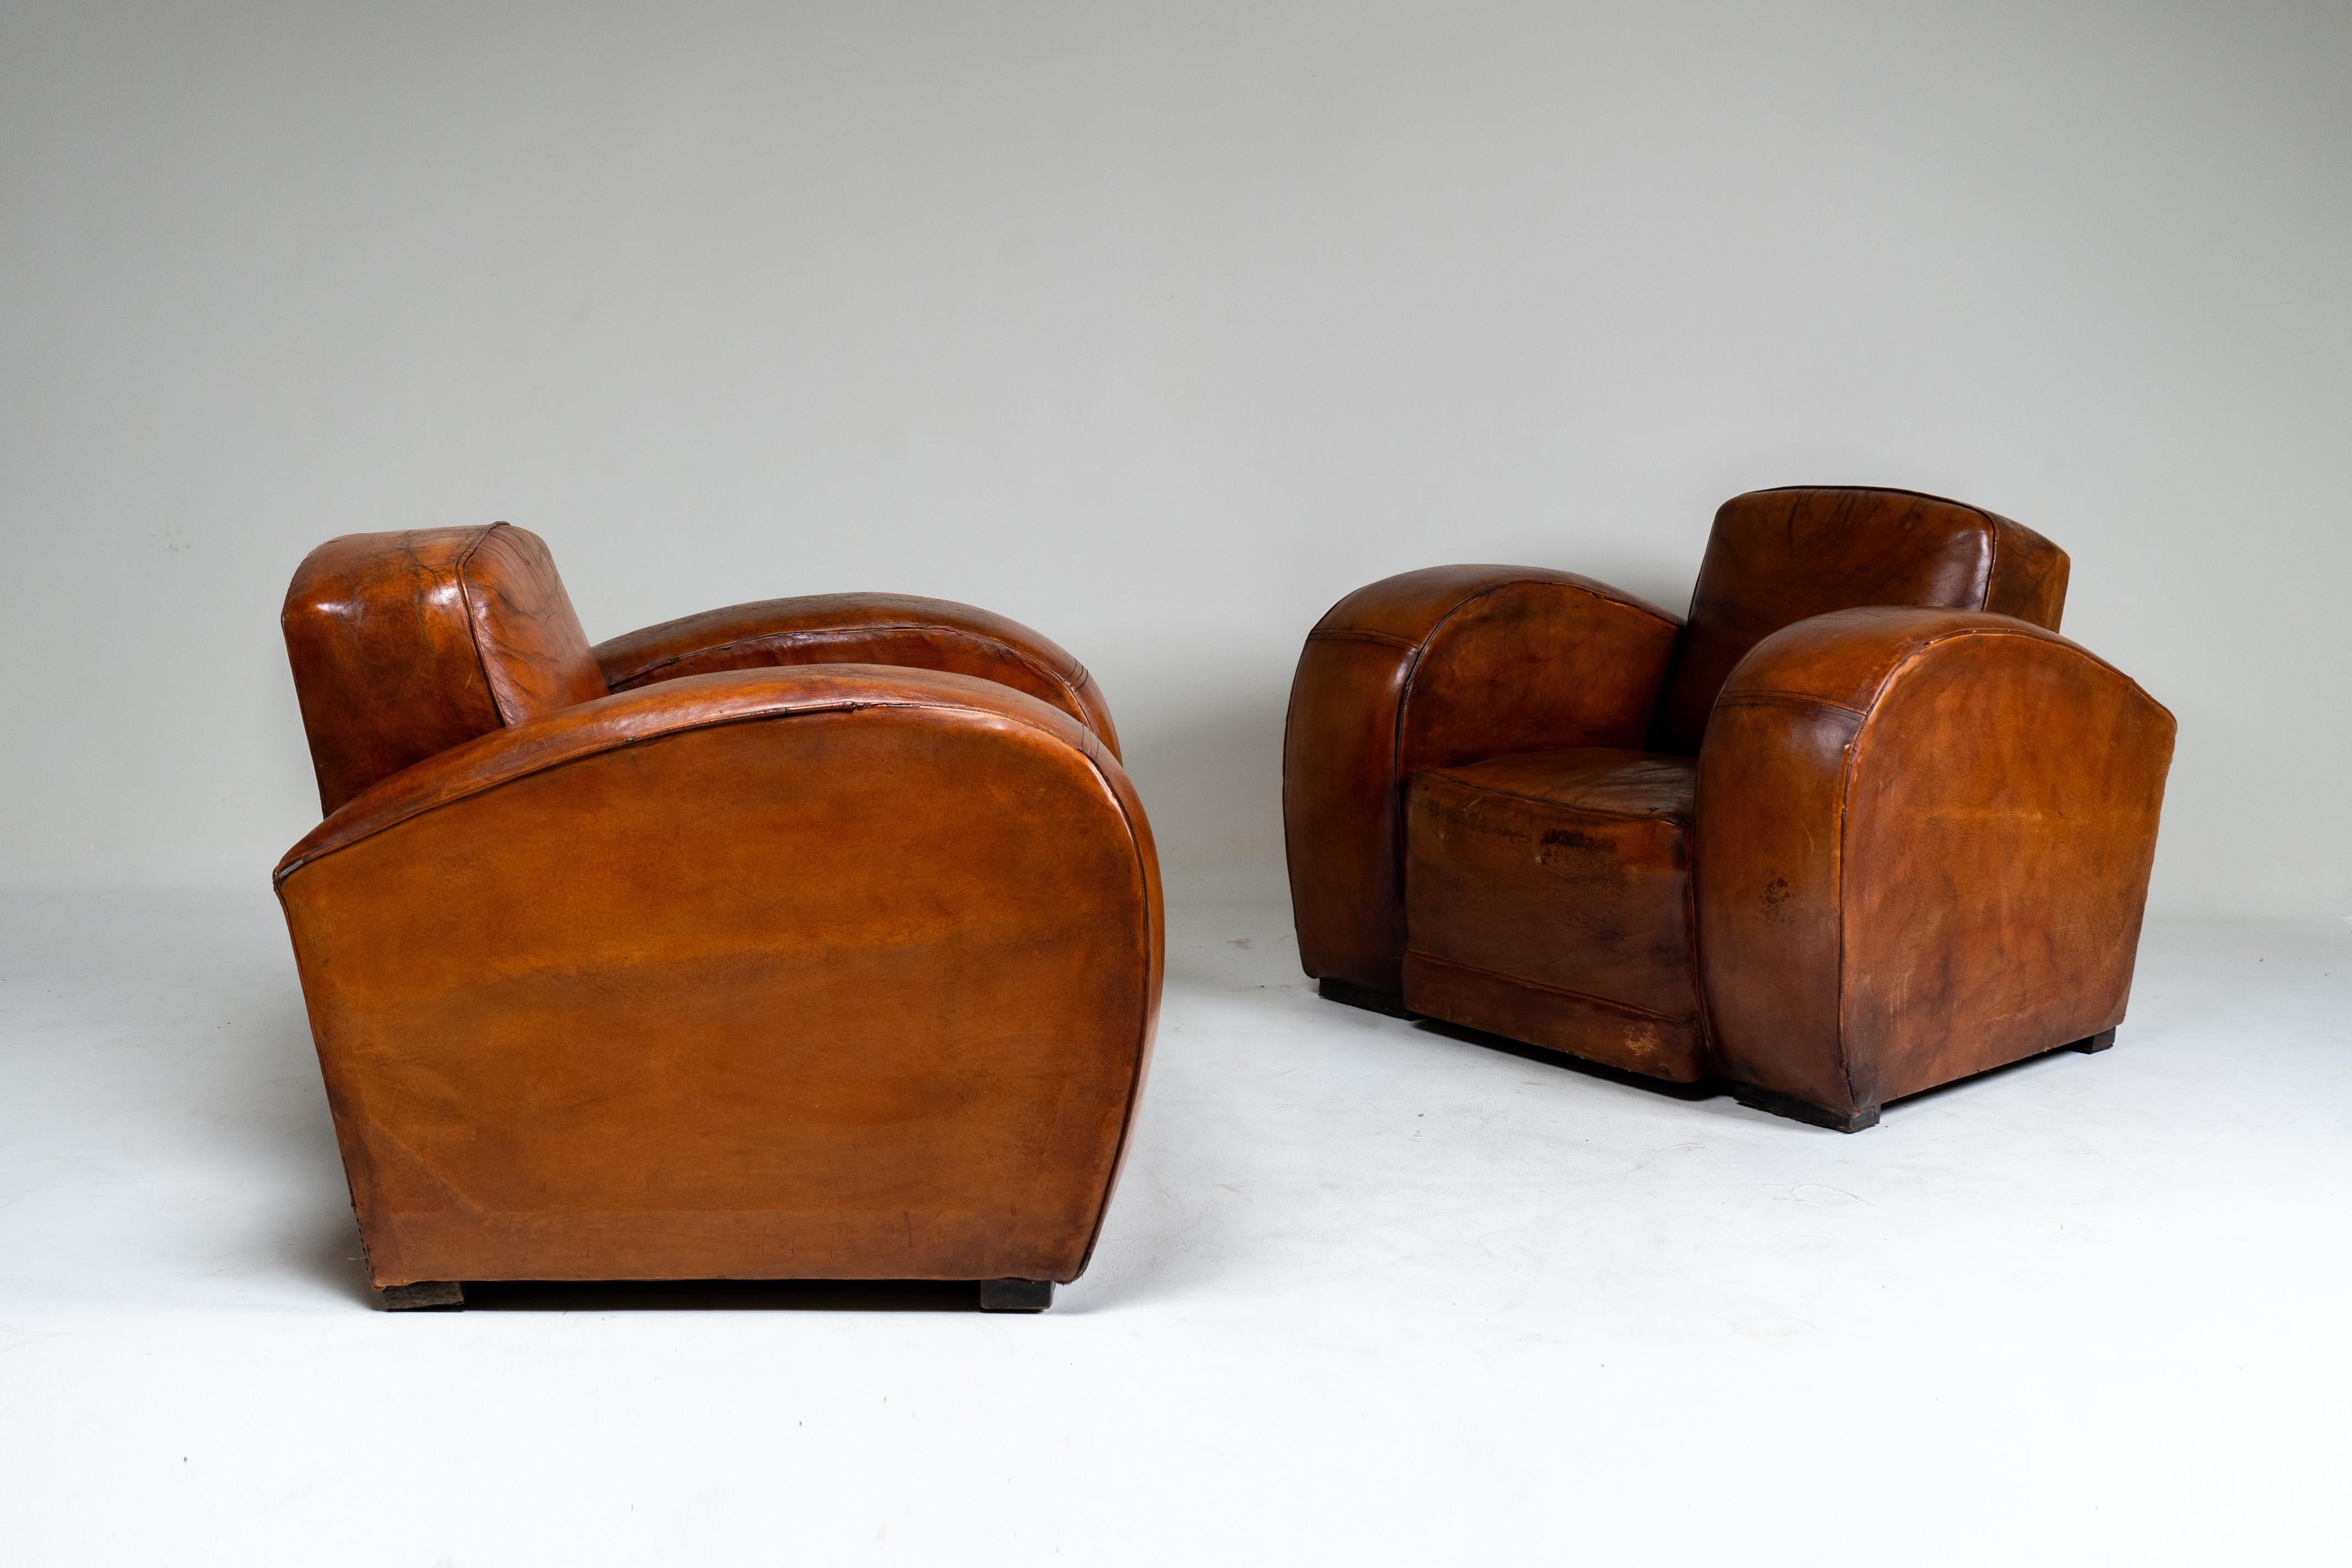 A Pair of Art Deco Leather Club Chairs, France c.1930 For Sale 10